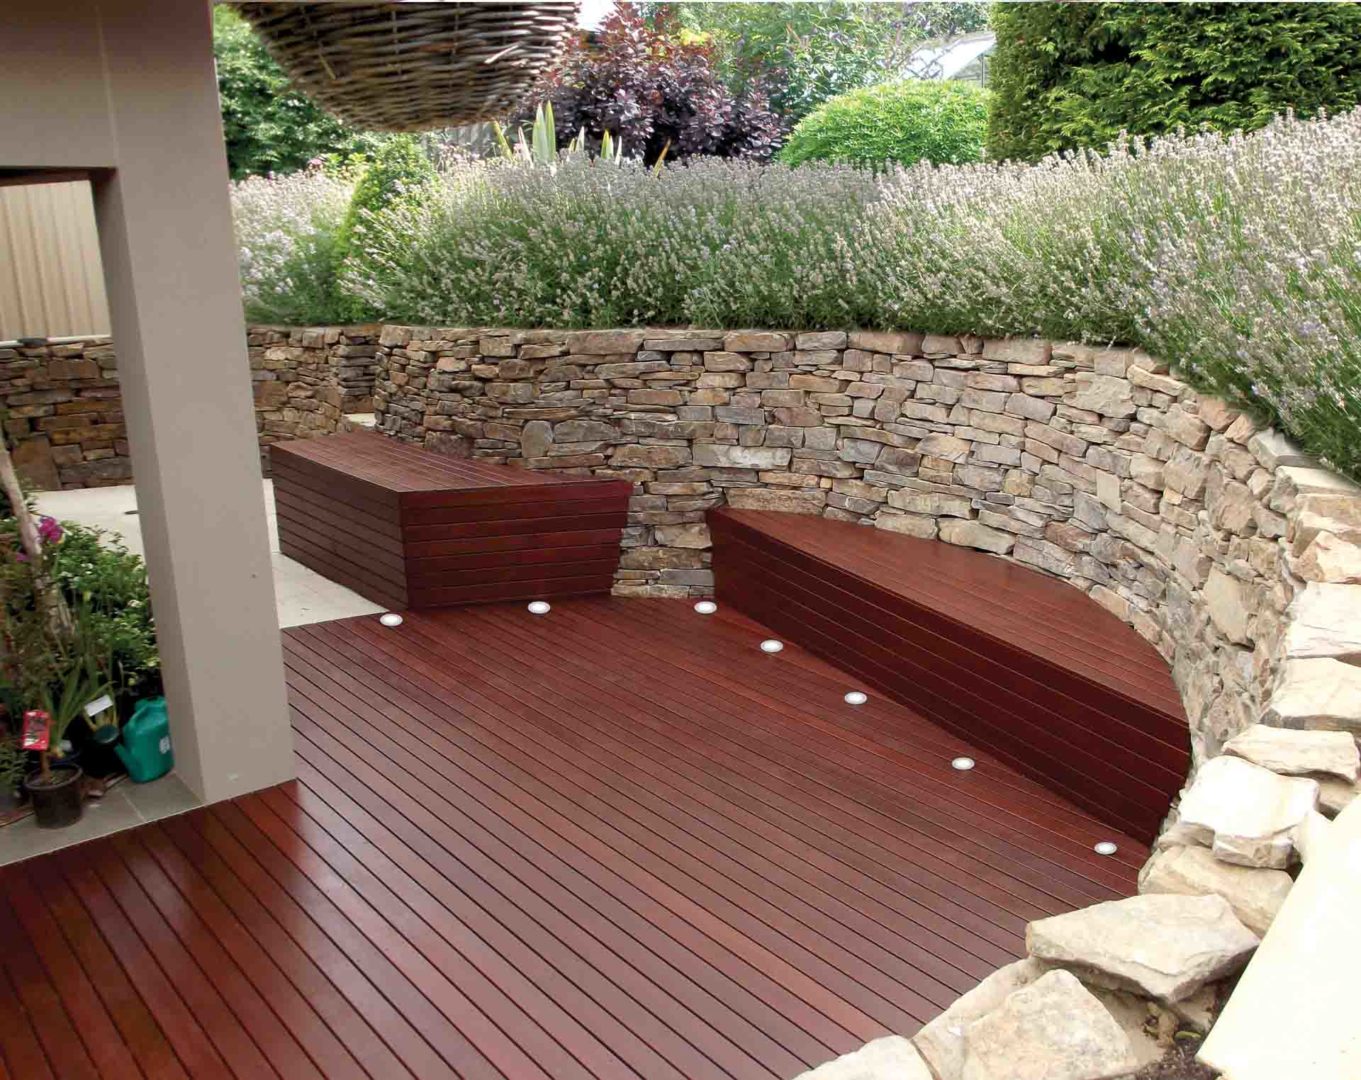 Timber Decking - Looking decking installation? Get a free measure and quote for outdoor decks in Adelaide, Sydney, Melbourne, Brisbane, Perth.